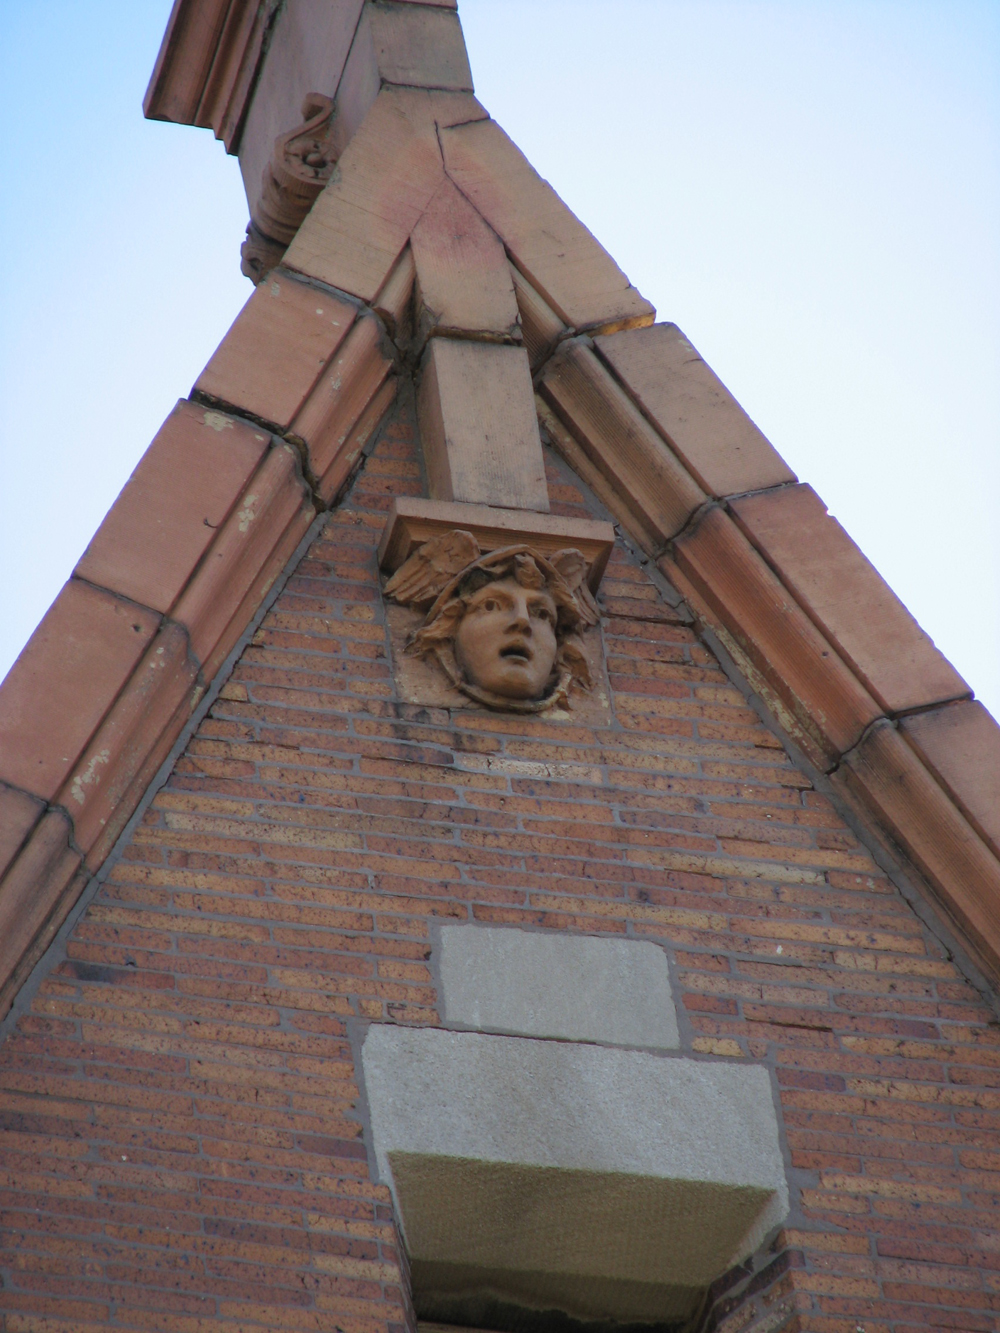 A detail on the rear of the Nugent building.